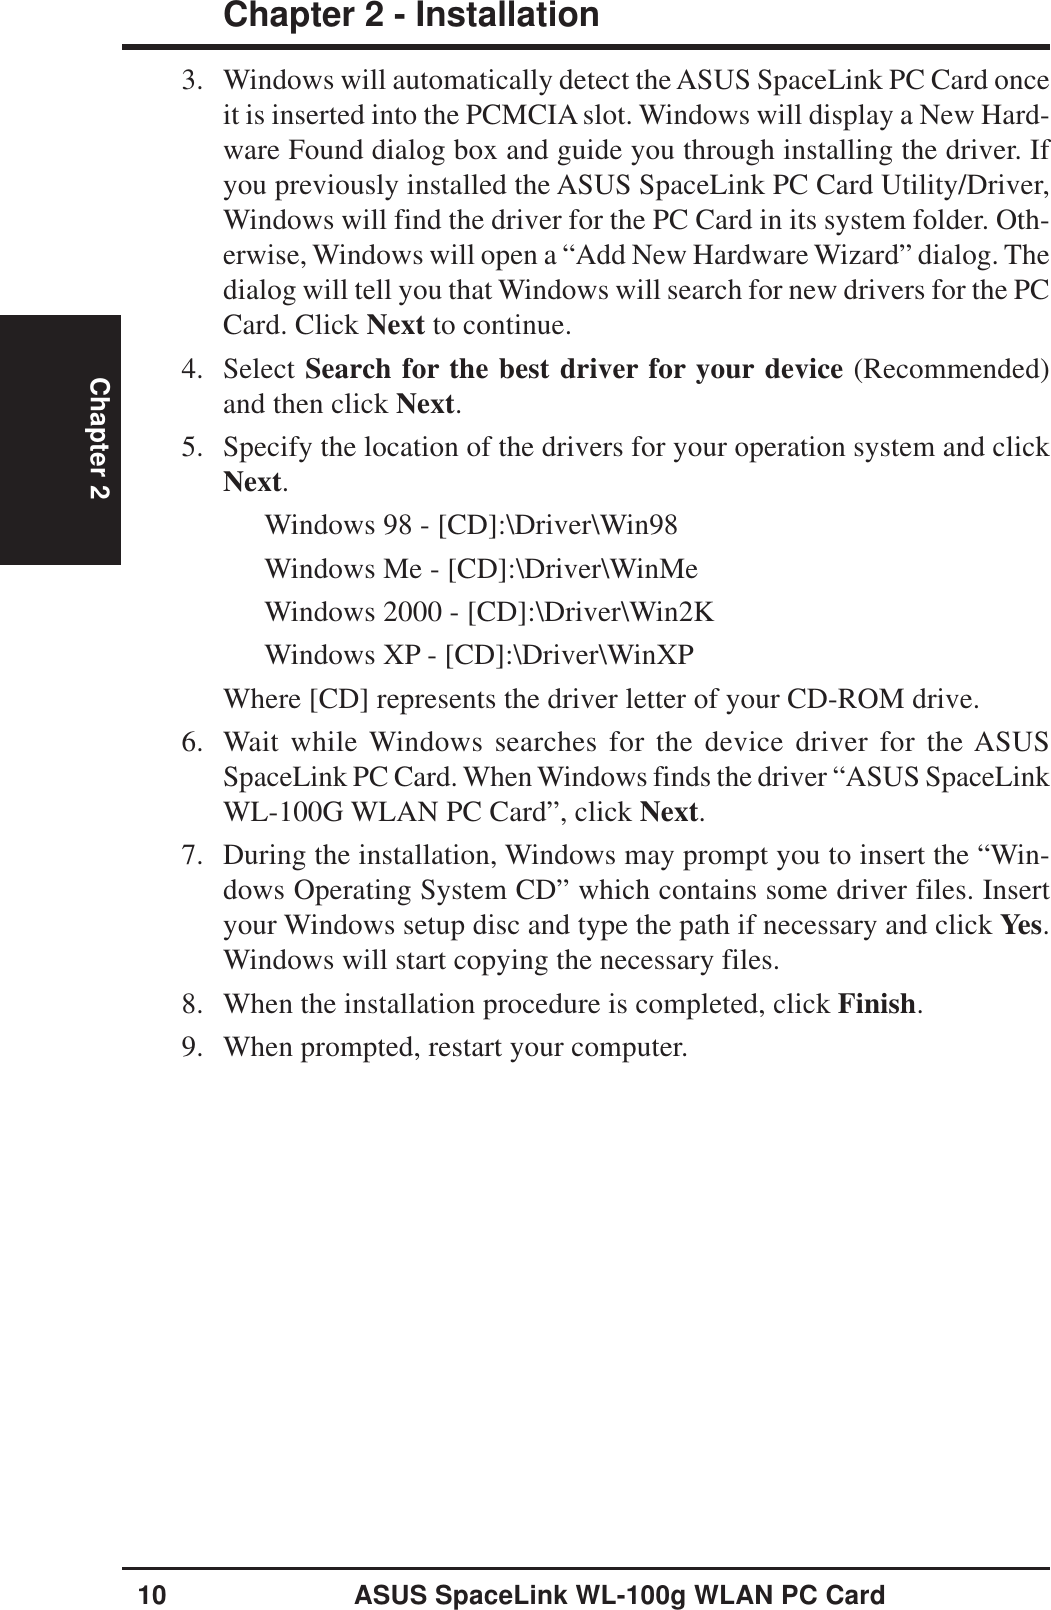 10 ASUS SpaceLink WL-100g WLAN PC CardChapter 2 - InstallationChapter 23. Windows will automatically detect the ASUS SpaceLink PC Card onceit is inserted into the PCMCIA slot. Windows will display a New Hard-ware Found dialog box and guide you through installing the driver. Ifyou previously installed the ASUS SpaceLink PC Card Utility/Driver,Windows will find the driver for the PC Card in its system folder. Oth-erwise, Windows will open a “Add New Hardware Wizard” dialog. Thedialog will tell you that Windows will search for new drivers for the PCCard. Click Next to continue.4. Select Search for the best driver for your device (Recommended)and then click Next.5. Specify the location of the drivers for your operation system and clickNext.Windows 98 - [CD]:\Driver\Win98Windows Me - [CD]:\Driver\WinMeWindows 2000 - [CD]:\Driver\Win2KWindows XP - [CD]:\Driver\WinXPWhere [CD] represents the driver letter of your CD-ROM drive.6. Wait while Windows searches for the device driver for the ASUSSpaceLink PC Card. When Windows finds the driver “ASUS SpaceLinkWL-100G WLAN PC Card”, click Next.7. During the installation, Windows may prompt you to insert the “Win-dows Operating System CD” which contains some driver files. Insertyour Windows setup disc and type the path if necessary and click Yes.Windows will start copying the necessary files.8. When the installation procedure is completed, click Finish.9. When prompted, restart your computer.